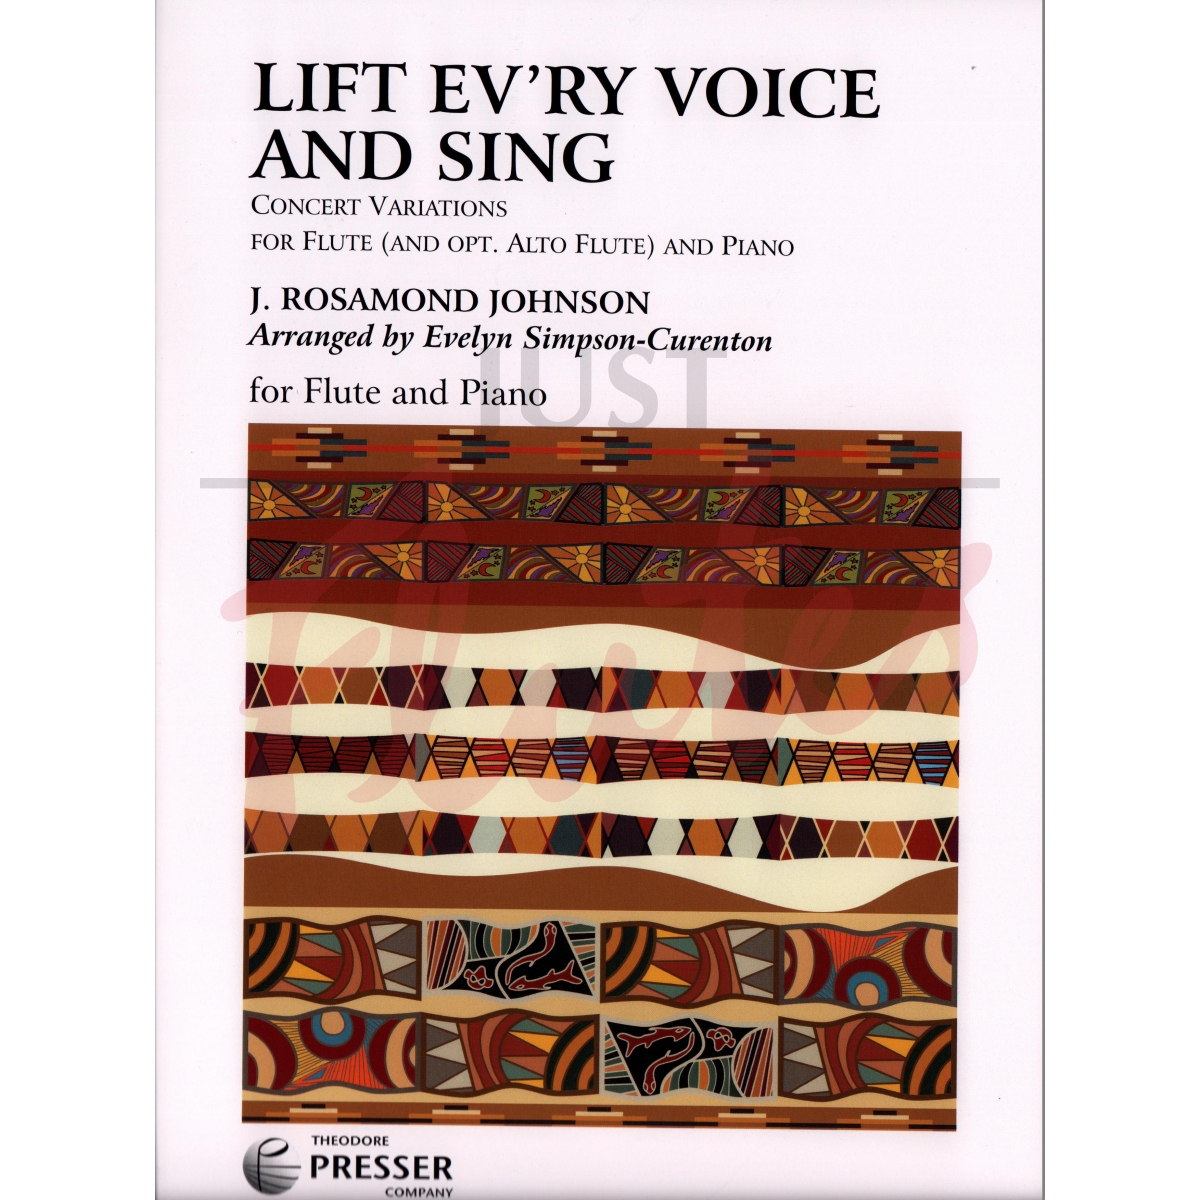 Lift Ev'ry Voice and Sing Concert Variations for Flute and Piano